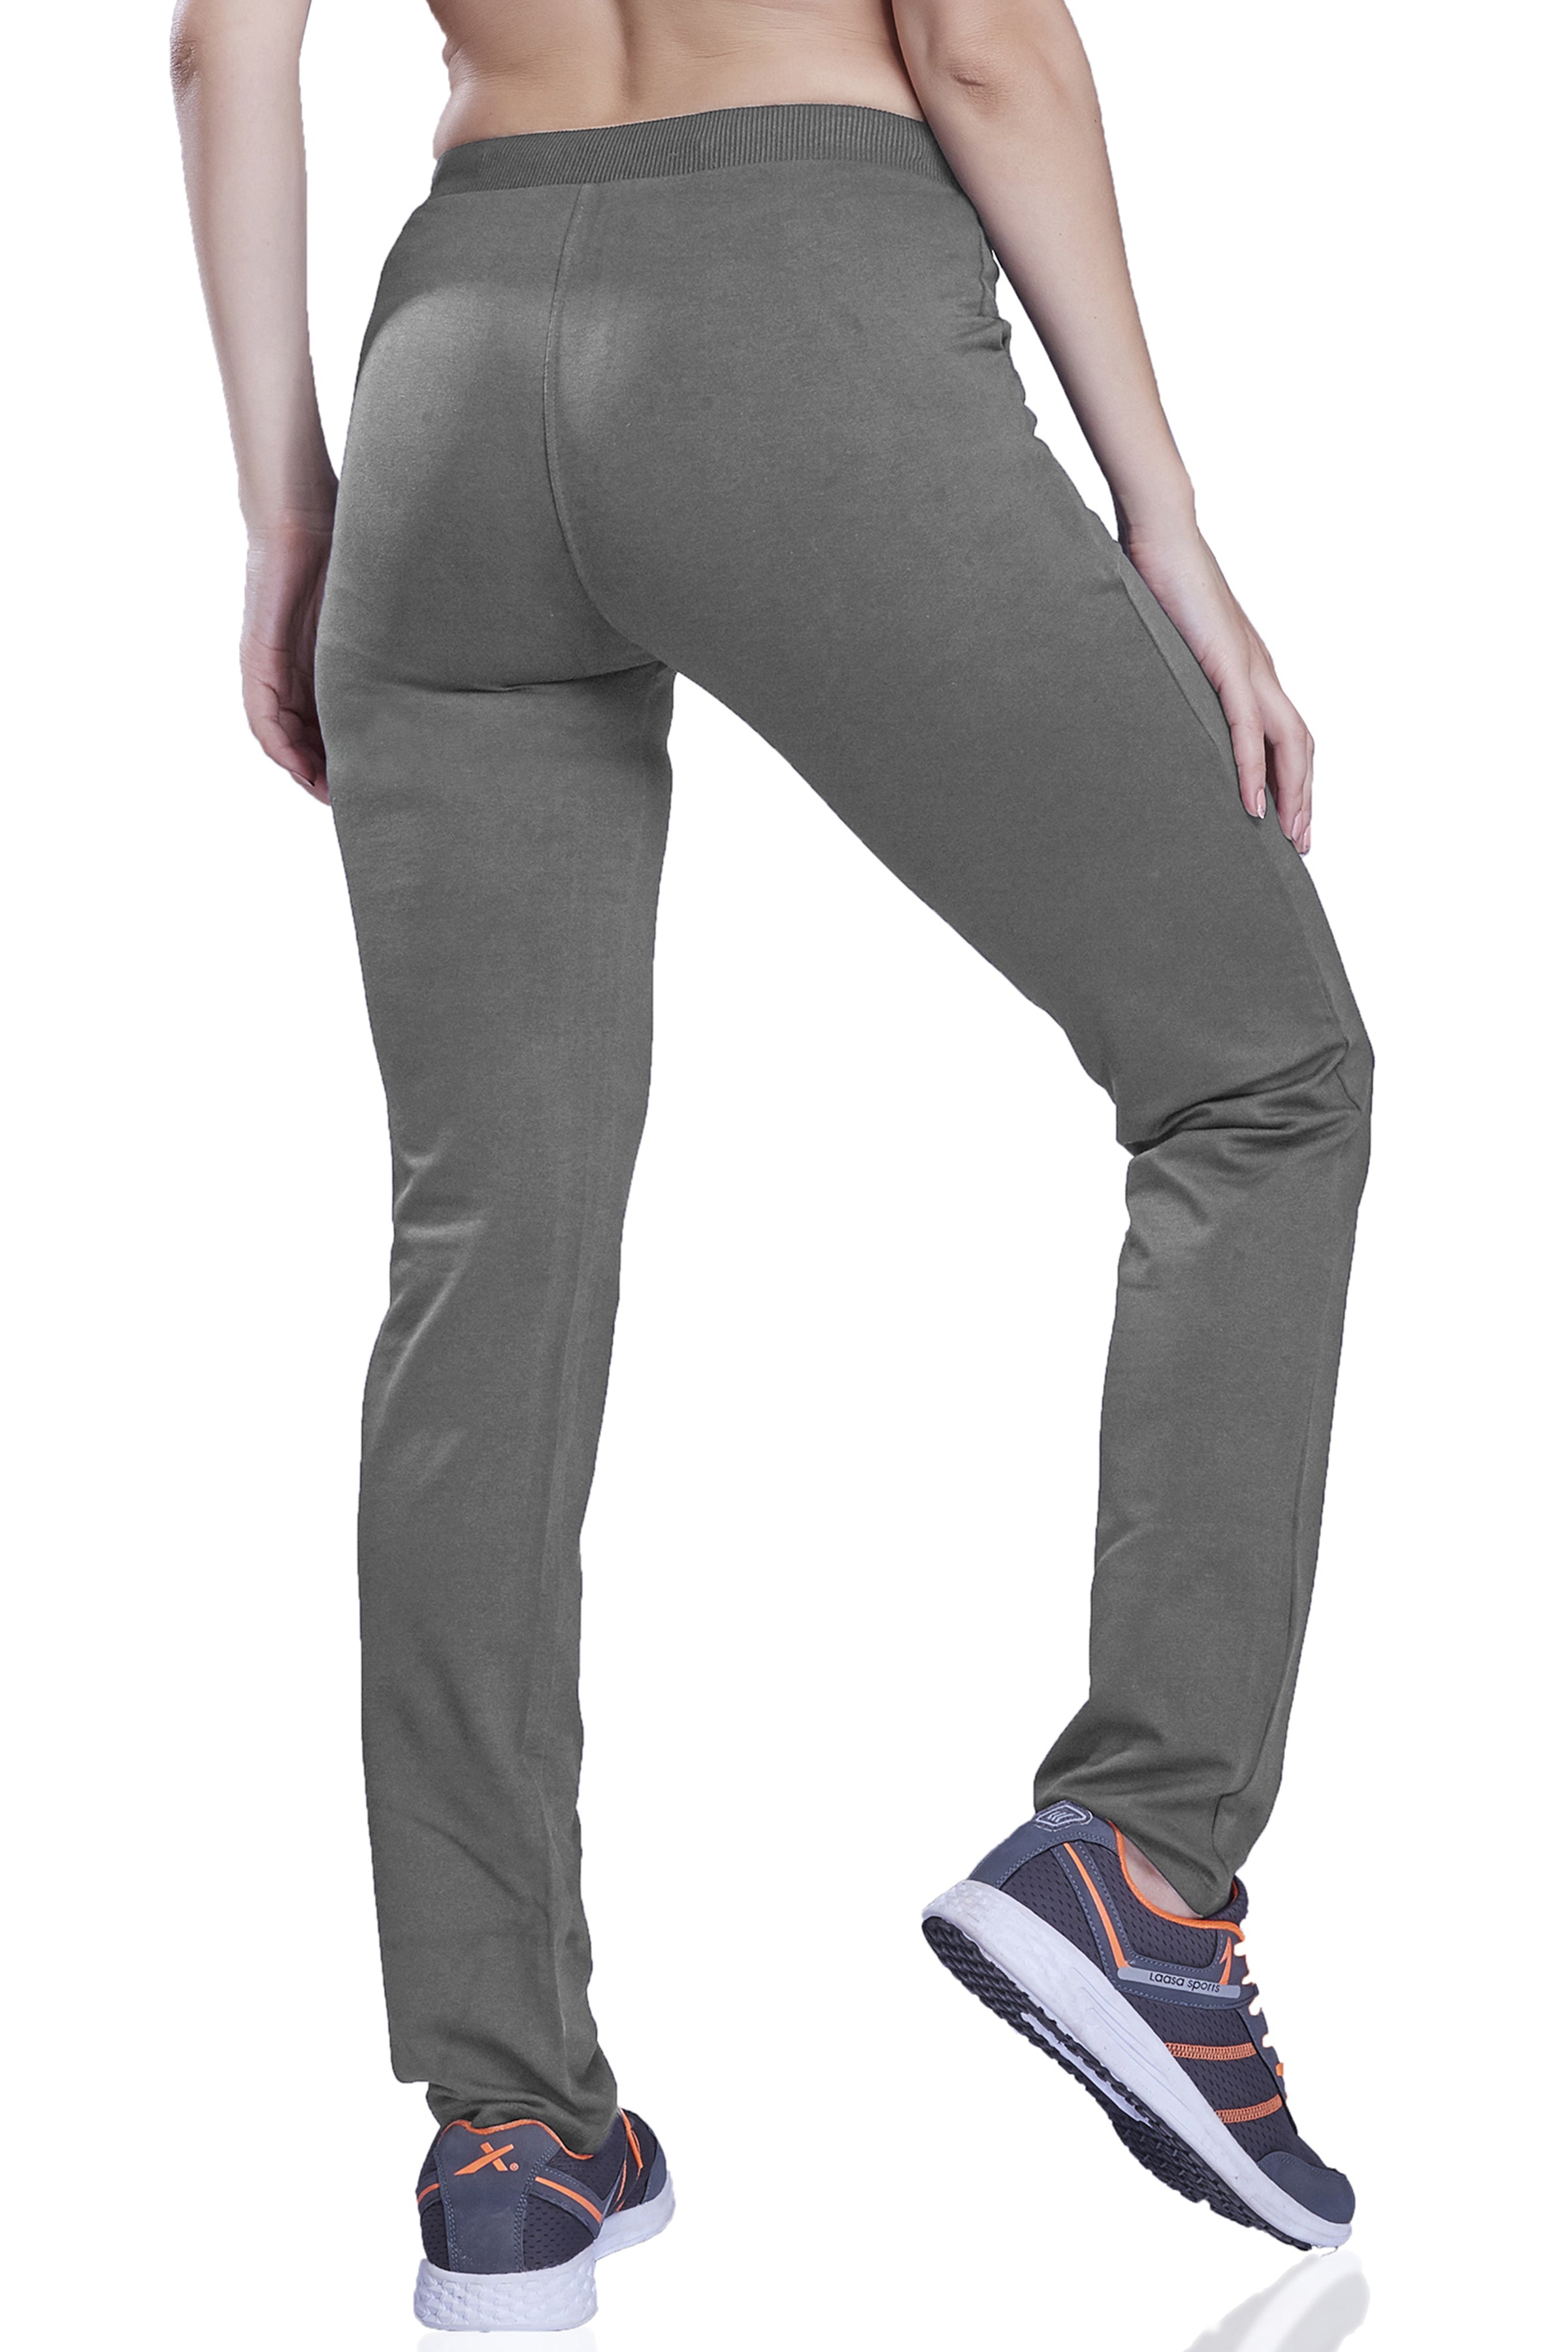 Dixcy Scott Trackpants : Buy Dixcy Scott Solid Attractive Track Pant With A  Concealed Zipper Pocket Online | Nykaa Fashion